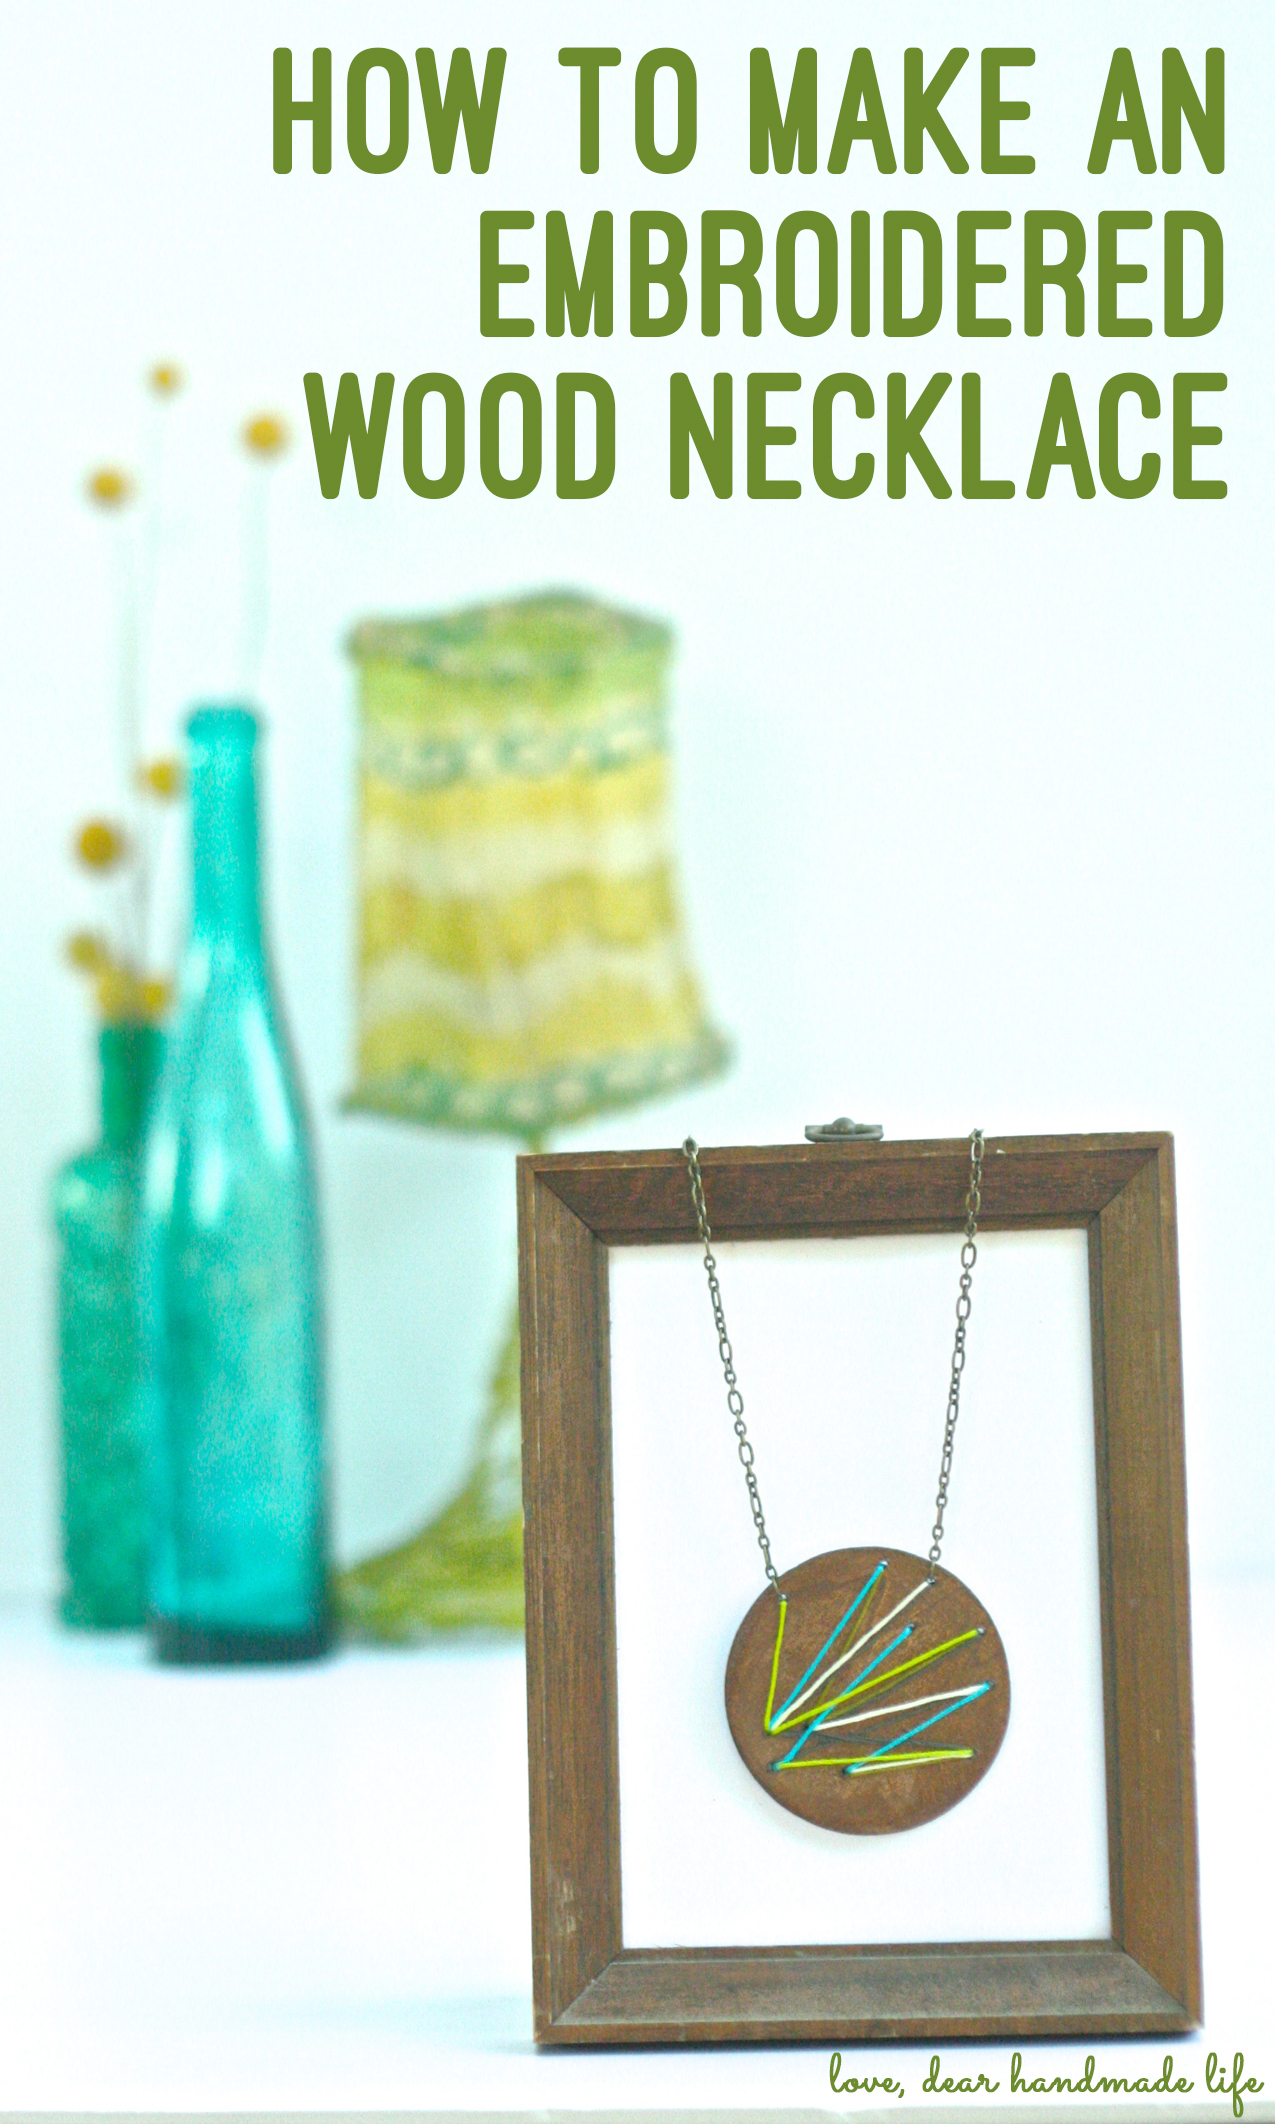 5-how-to-make-embroidered-wood-necklace-dear-handmade-life